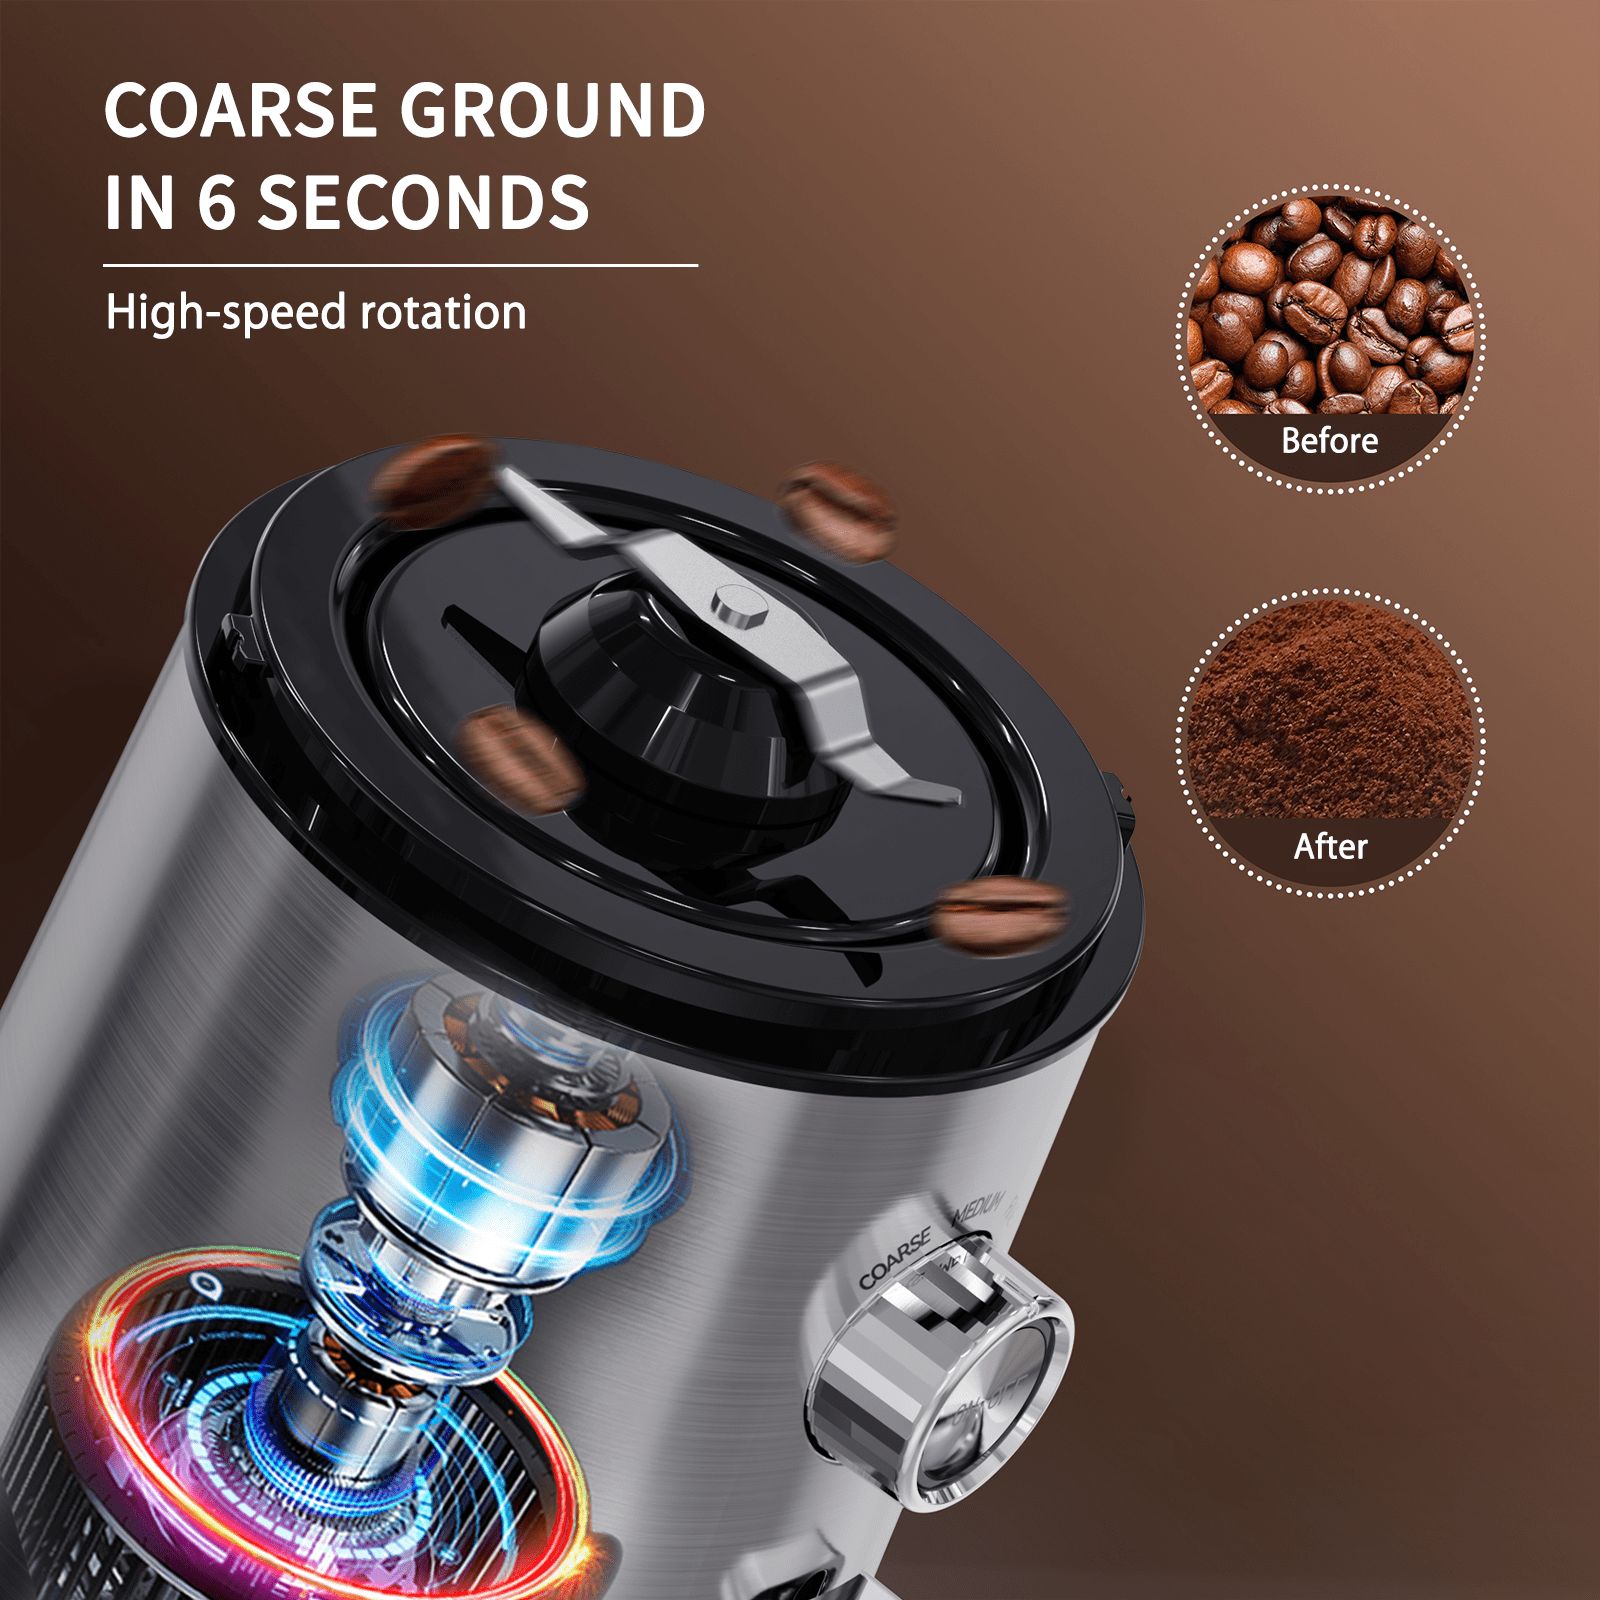 LINKChef Coffee Grinder Electric and Spice Grinder CG9230